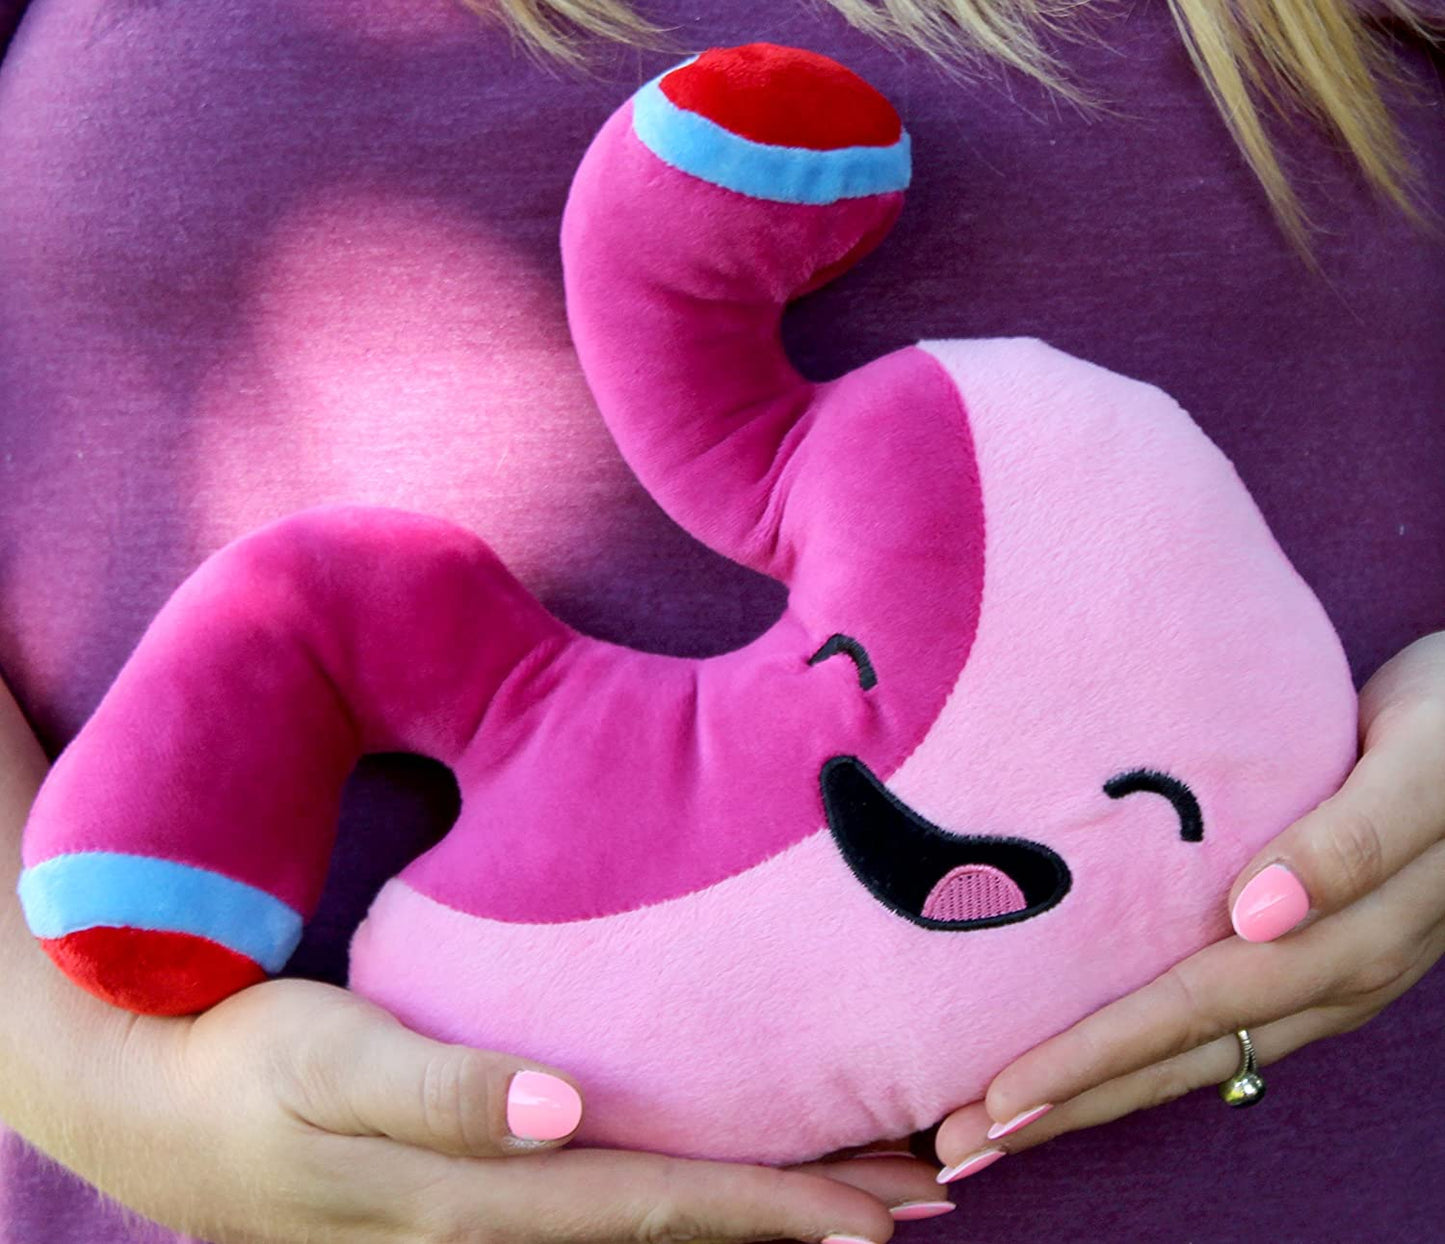 Plush Stomach - Barry The Sleeve - Stuffed Toy